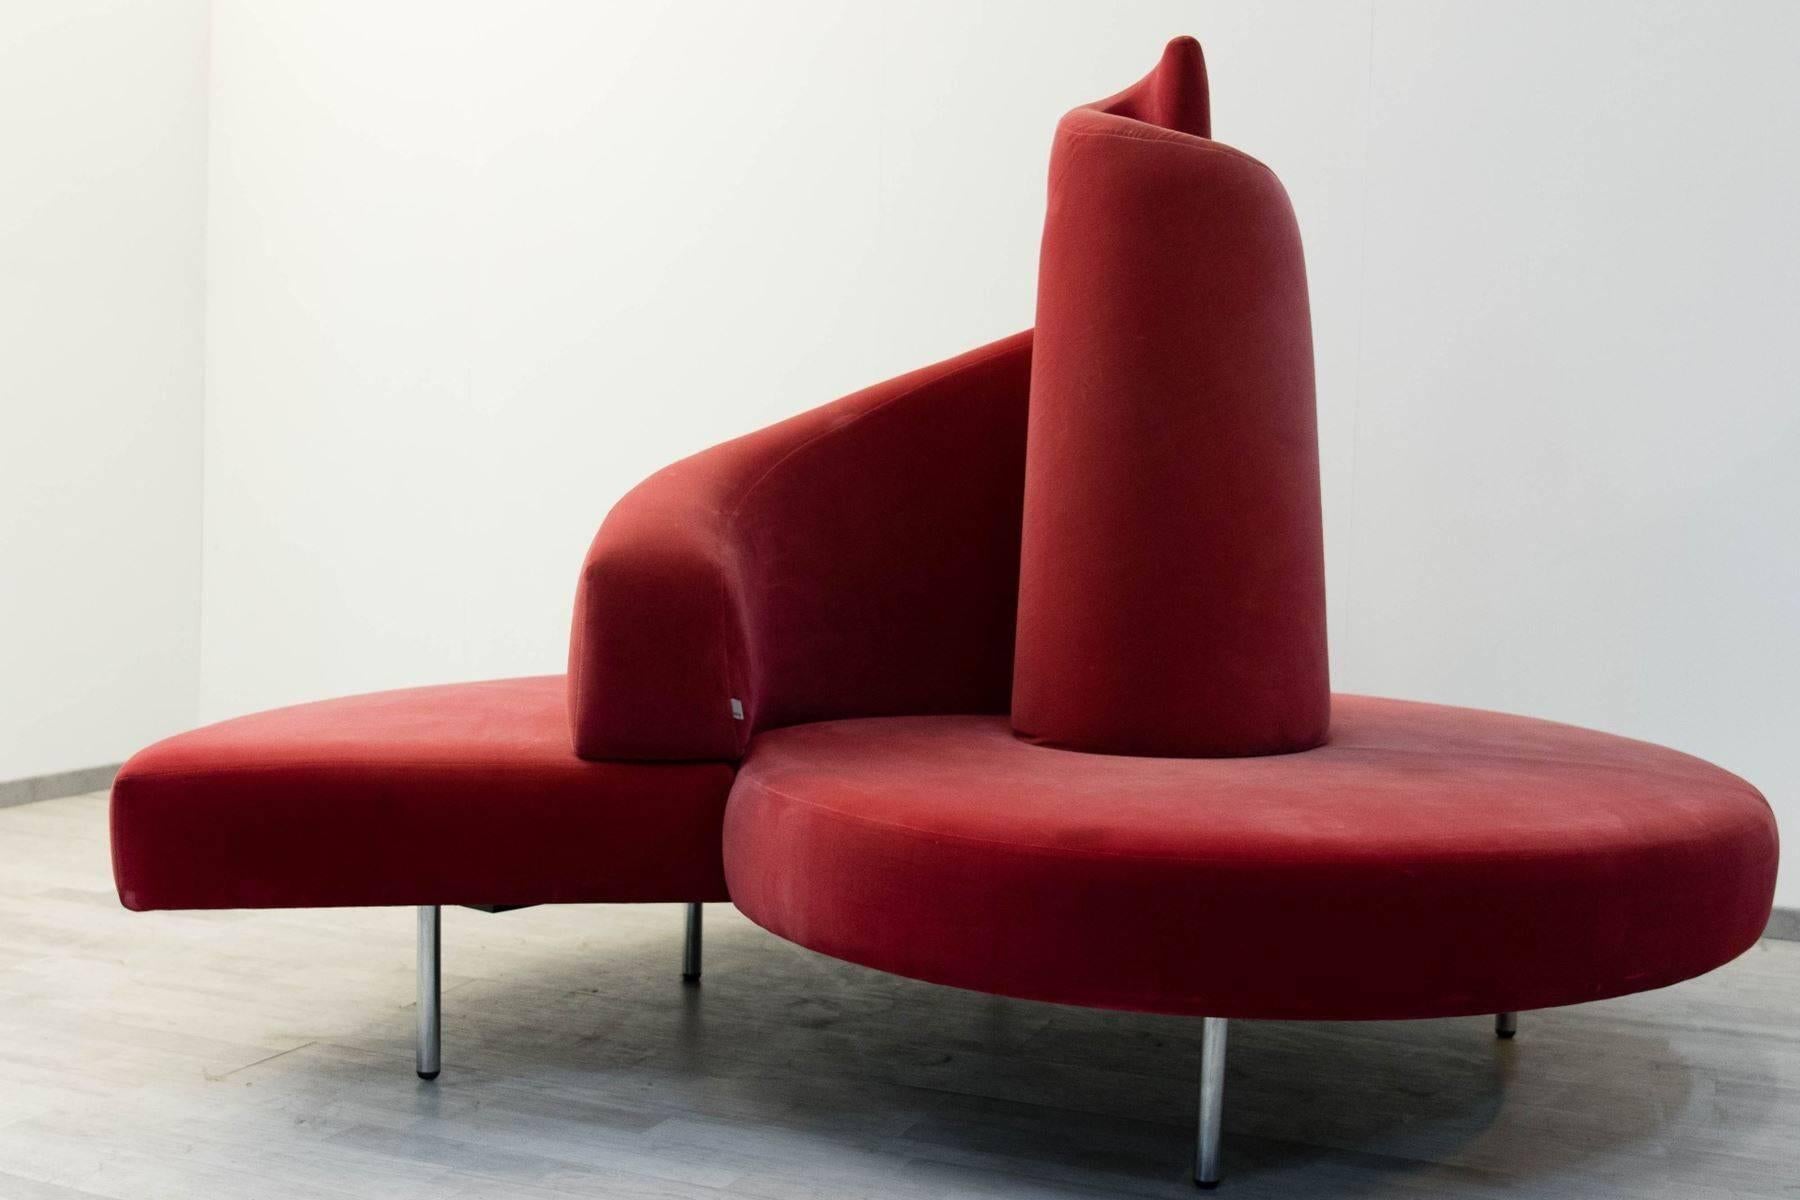 Loosely based on the Tatlin tower, a symbol of constructivism whose wooden model is preserved in the Beaubourg Museum in Paris. It is a sofa that deserves to be placed at the center of the space. A Totem for the living room, perfect also for public